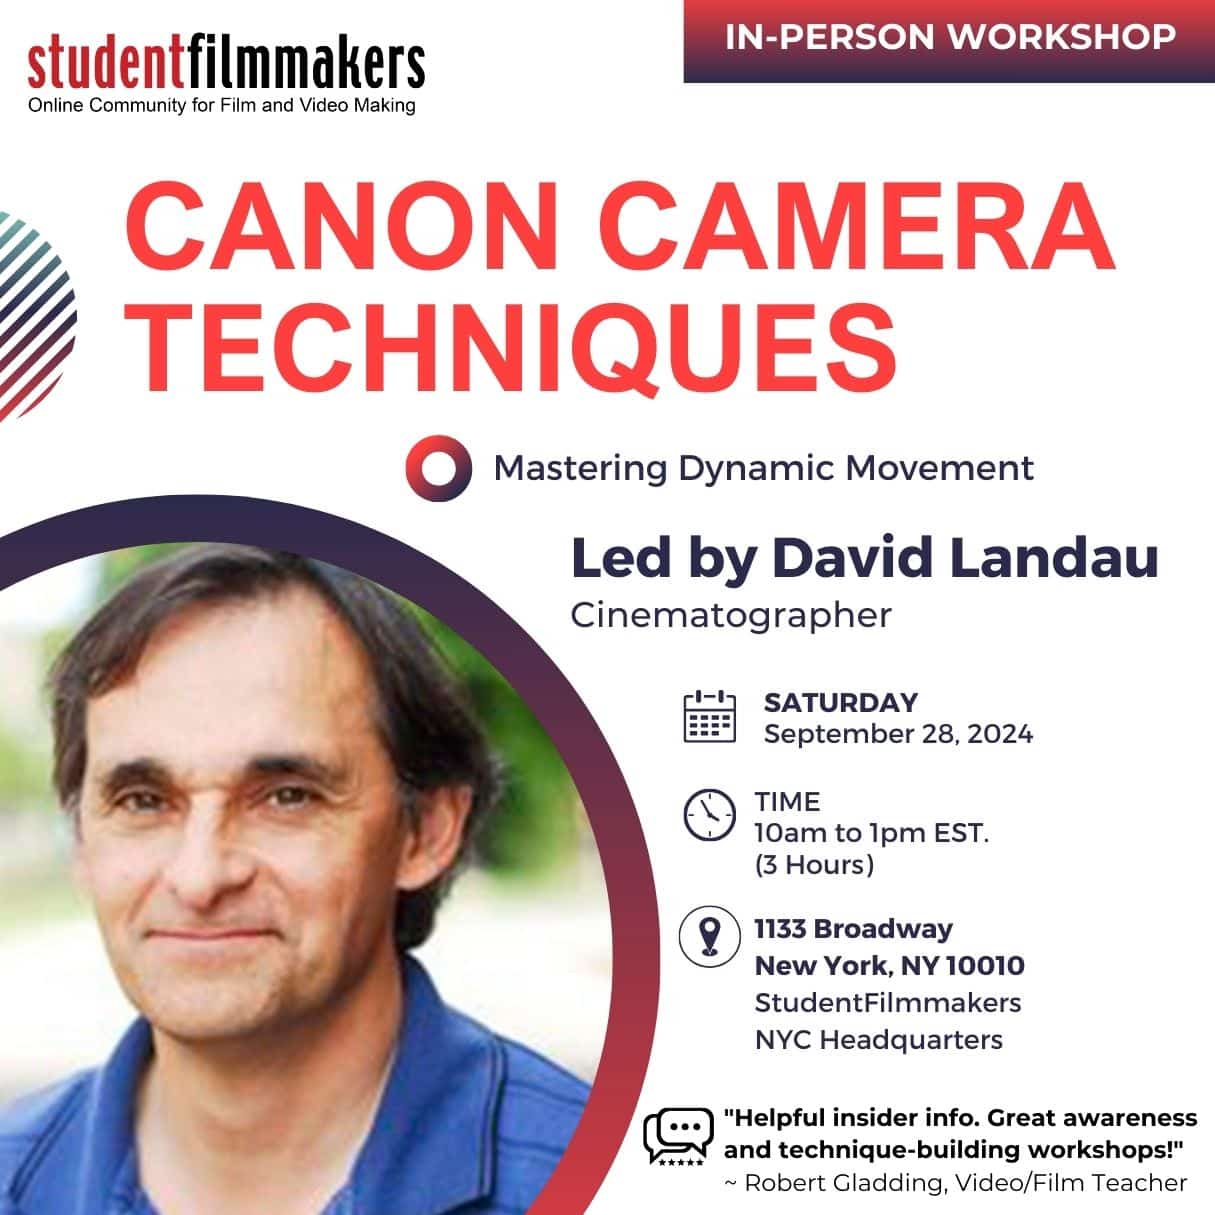 In-Person Workshop – “Canon Camera Techniques: Mastering Dynamic Movement” Led by David Landau – Manhattan, NYC, New York